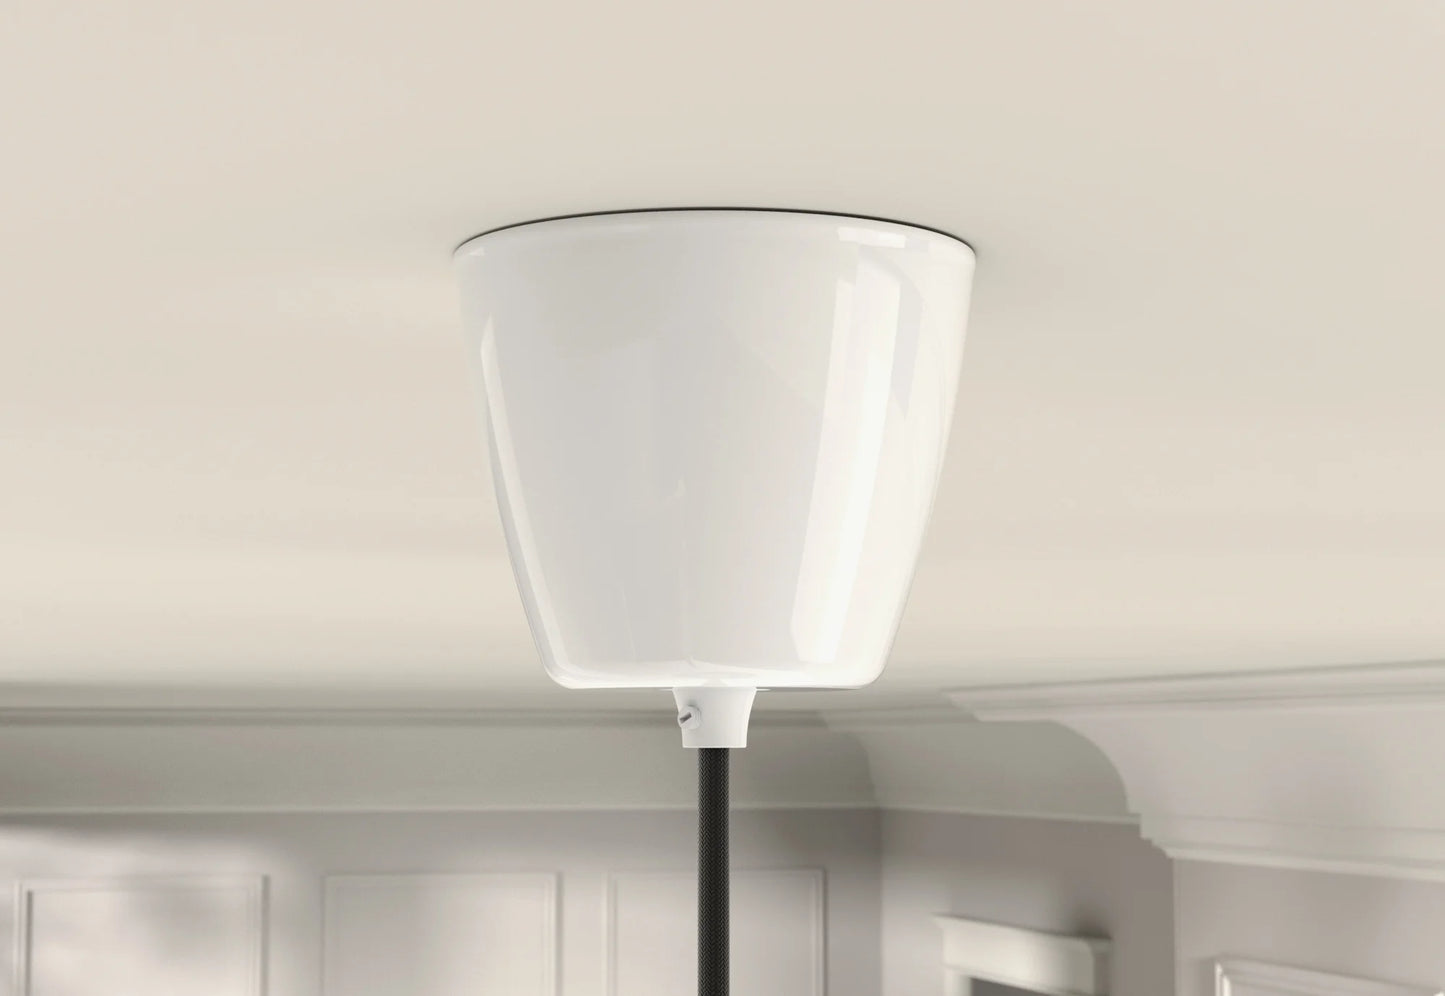 A white Coolicon Vitreous Enamel ceiling cup on a light cream ceiling